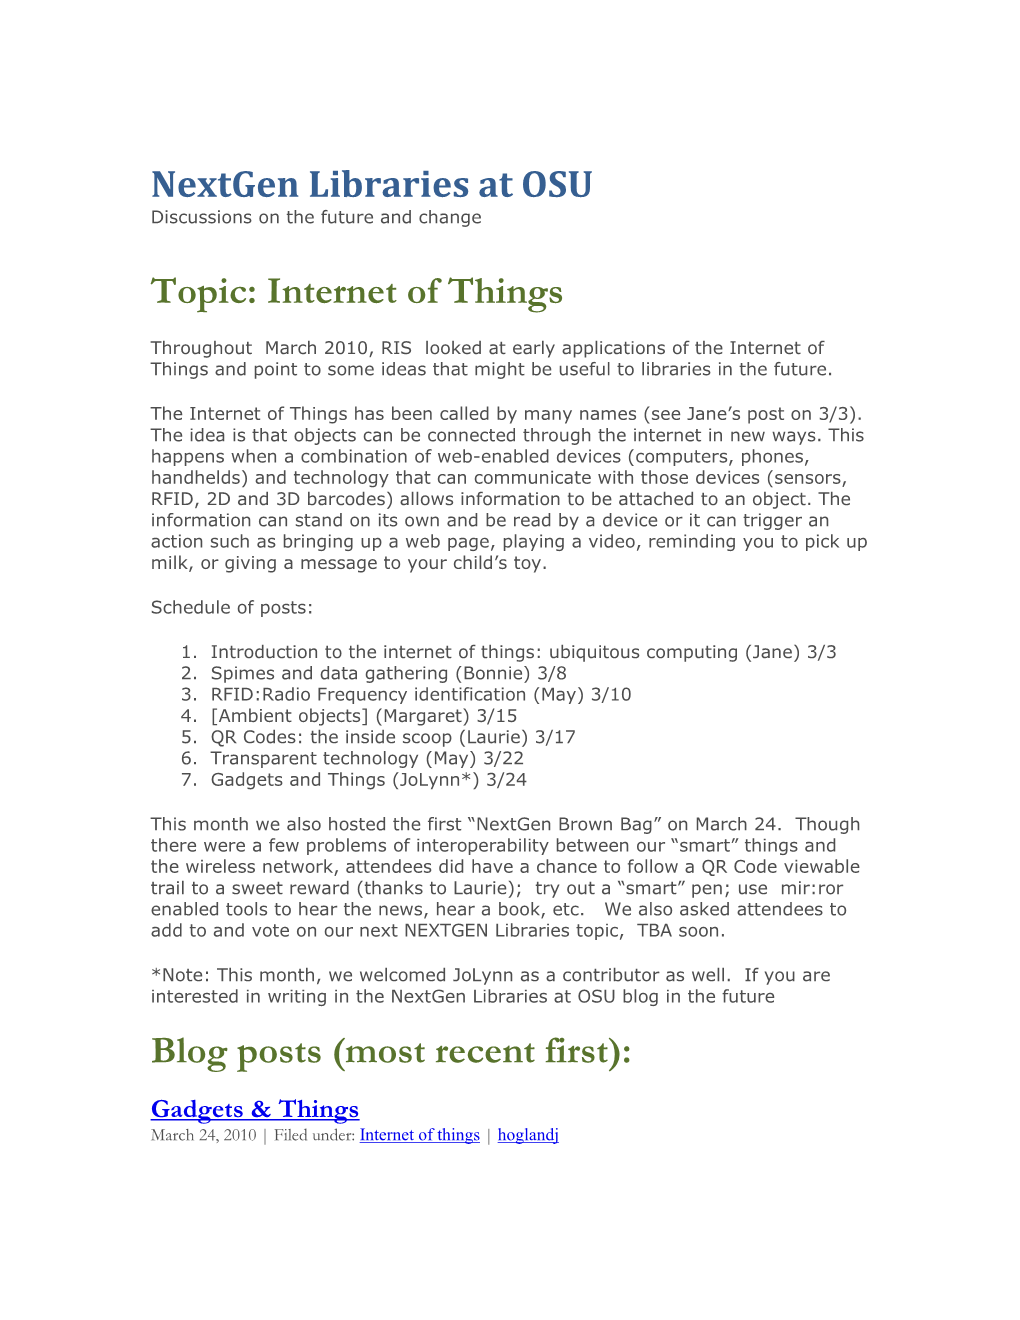 Nextgen Libraries at OSU Topic: Internet of Things Blog Posts (Most Recent First)